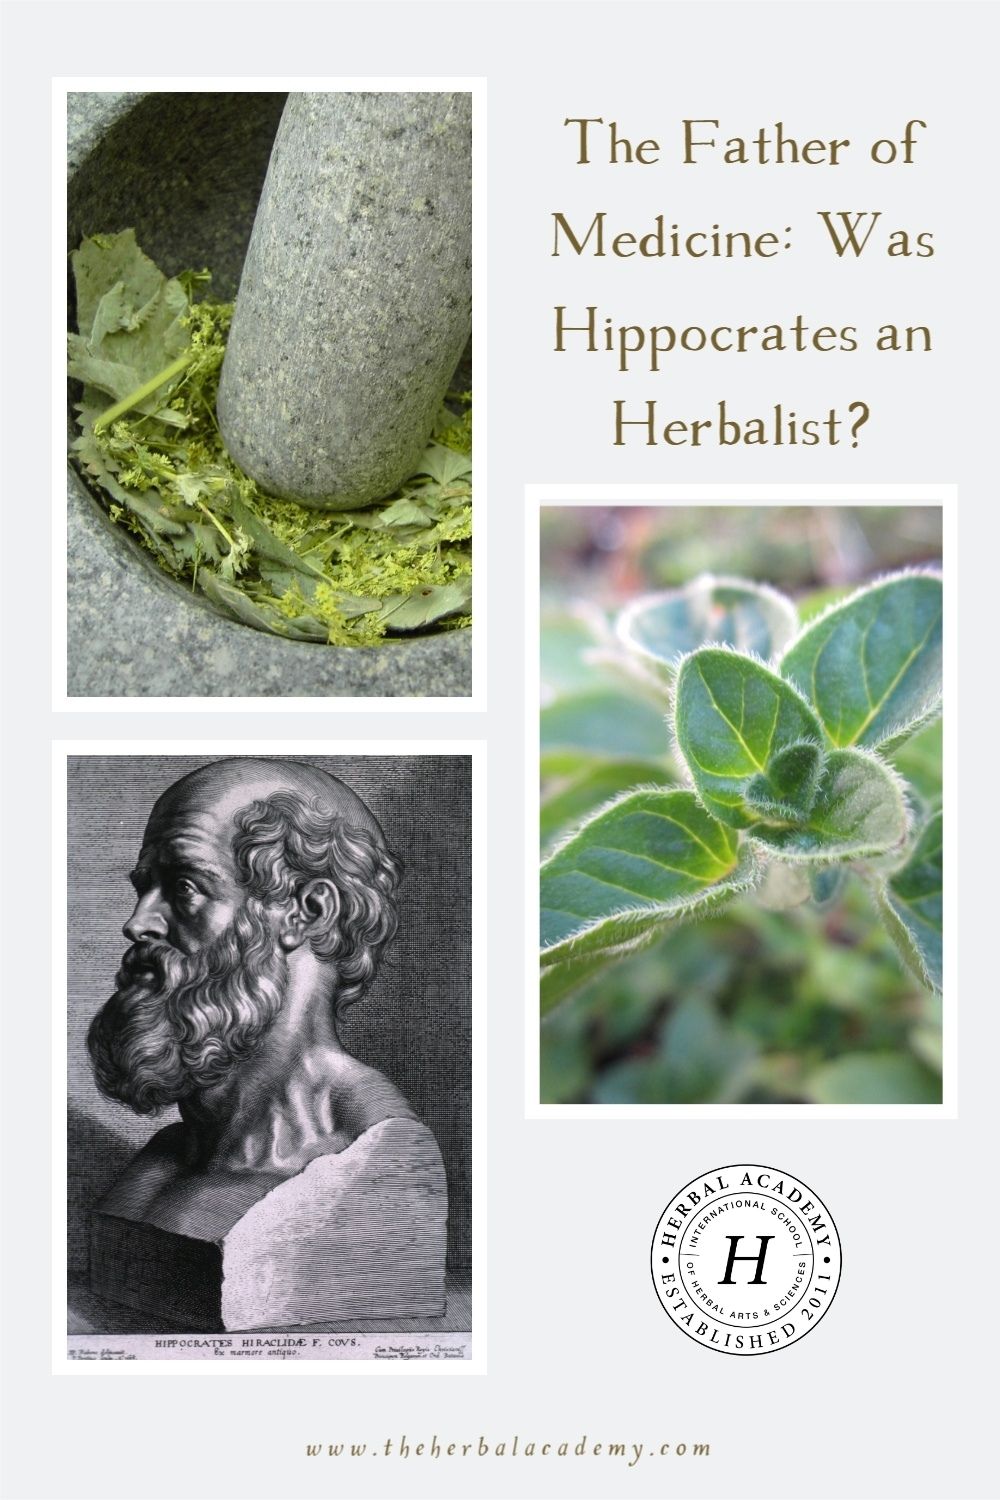 The Father of Medicine: Was Hippocrates an Herbalist? | Herbal Academy | Let’s explore how Hippocrates may have been known both as the Father of Medicine and a celebrated herbalist in his day.